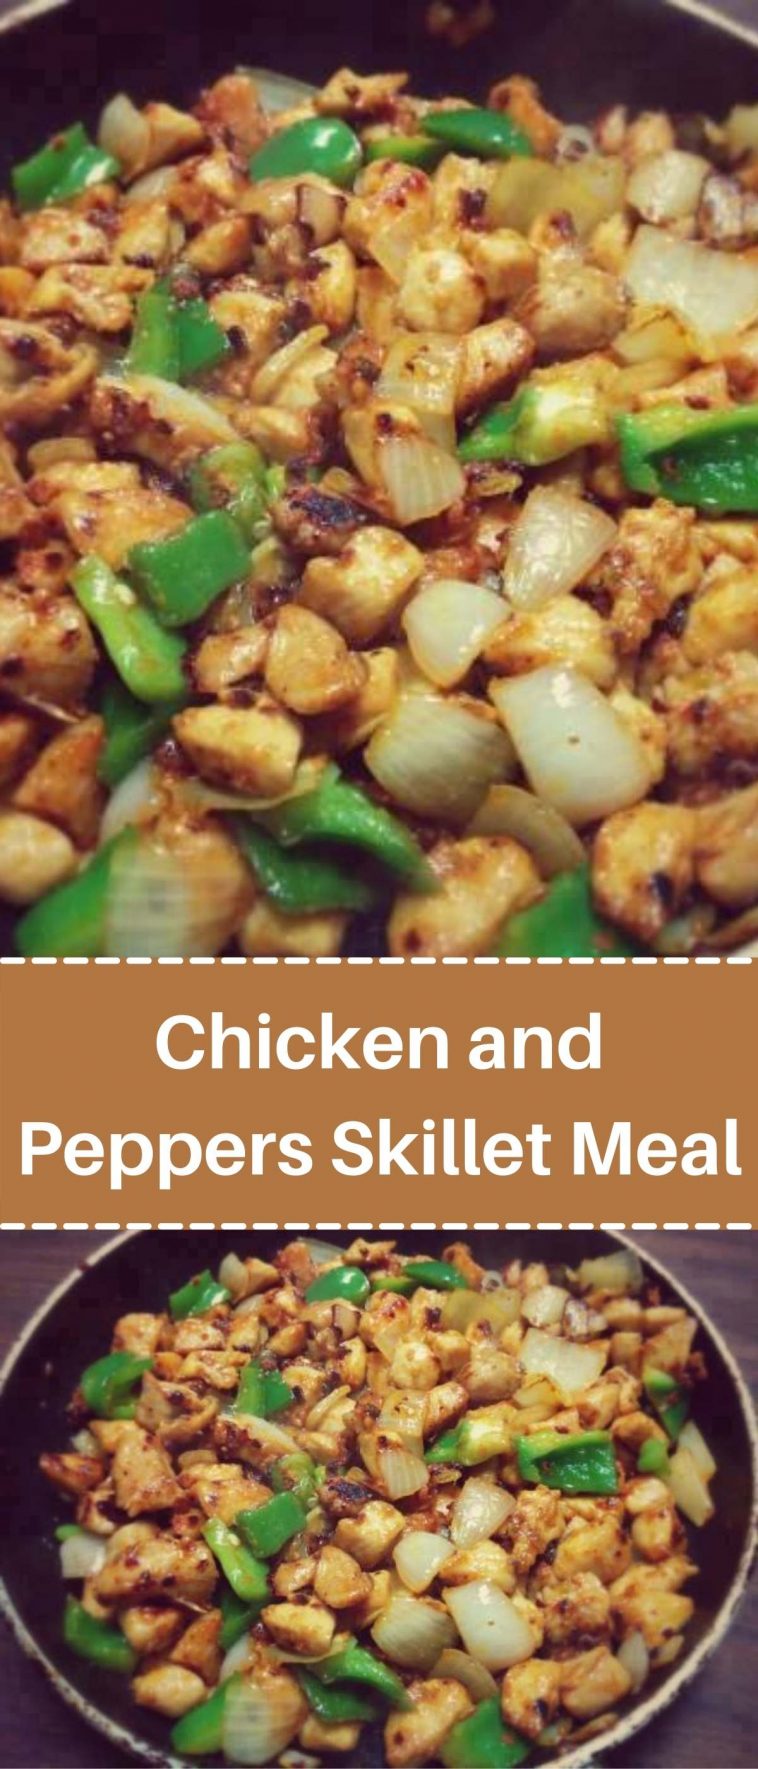 Chicken and Peppers Skillet Meal